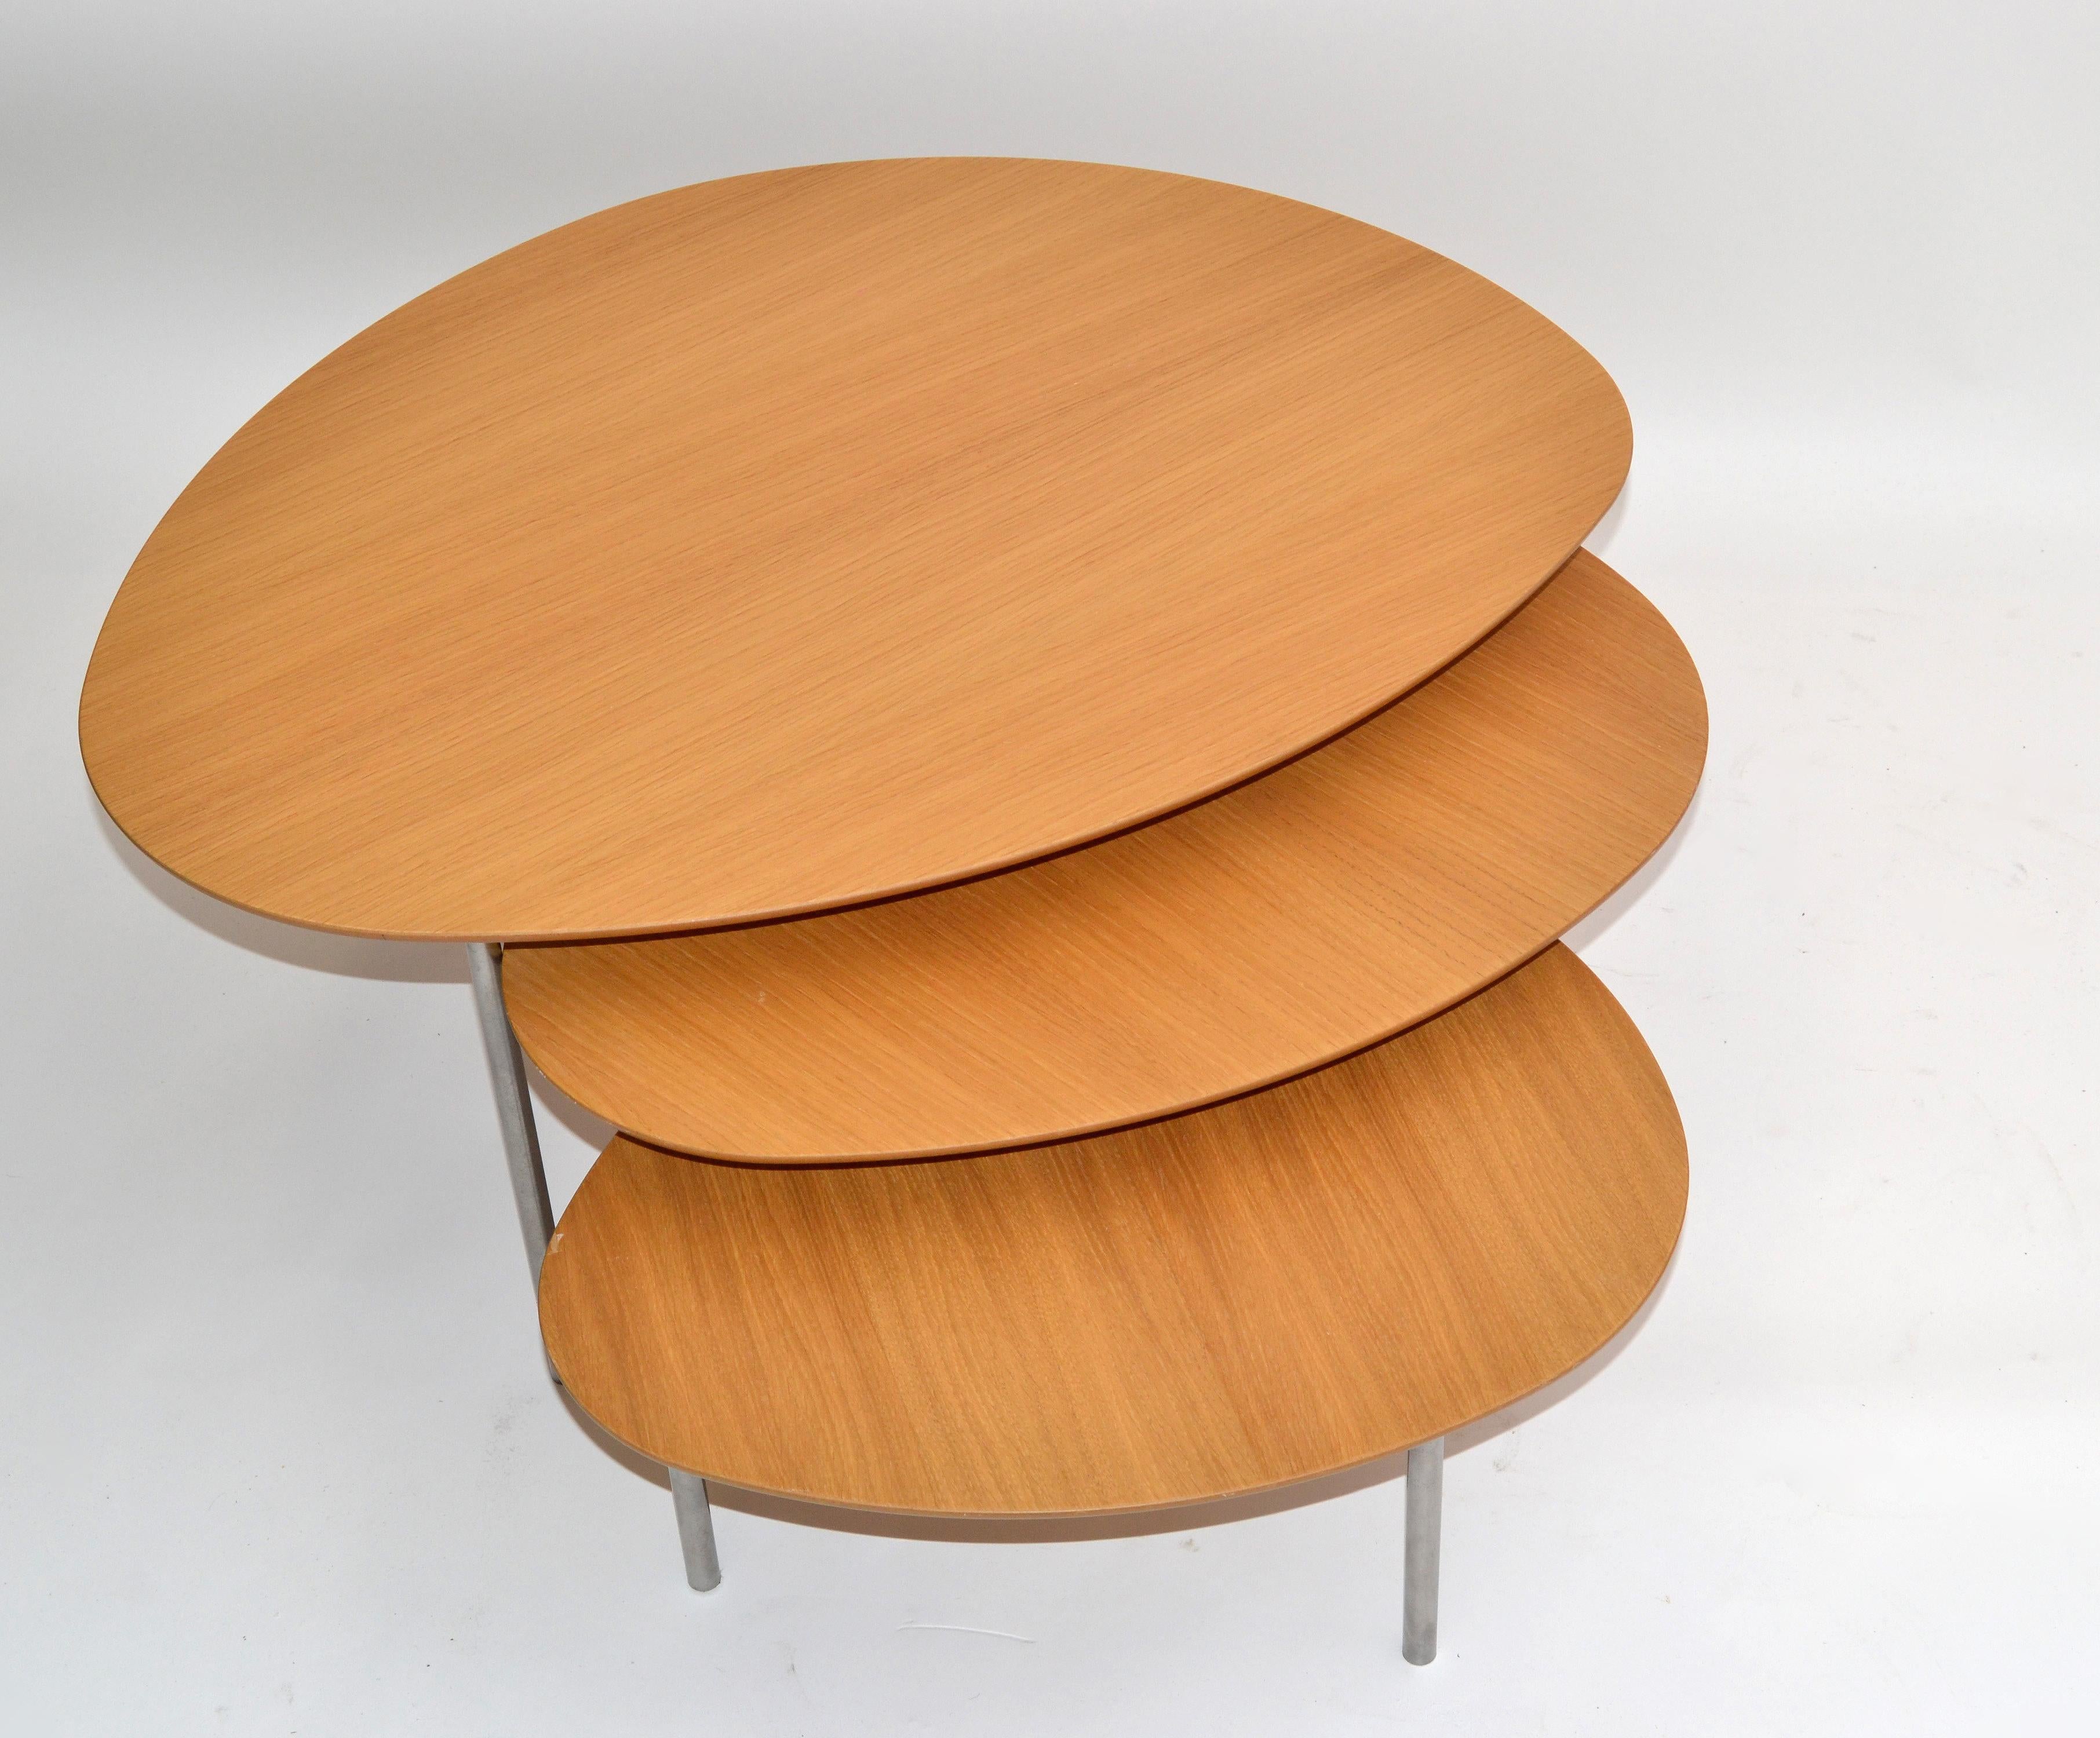 Set of 3 modern eclipse tan plywood nesting or stacking tables designed by Jon Gasca and made by STUA Design in Spain, 2009.
Steel legs can be easily unscrewed for shipping.
Measures: 22.0 D x 27.5 L x 12 inches H.
17.25 D x 21.75 L x 10 inches